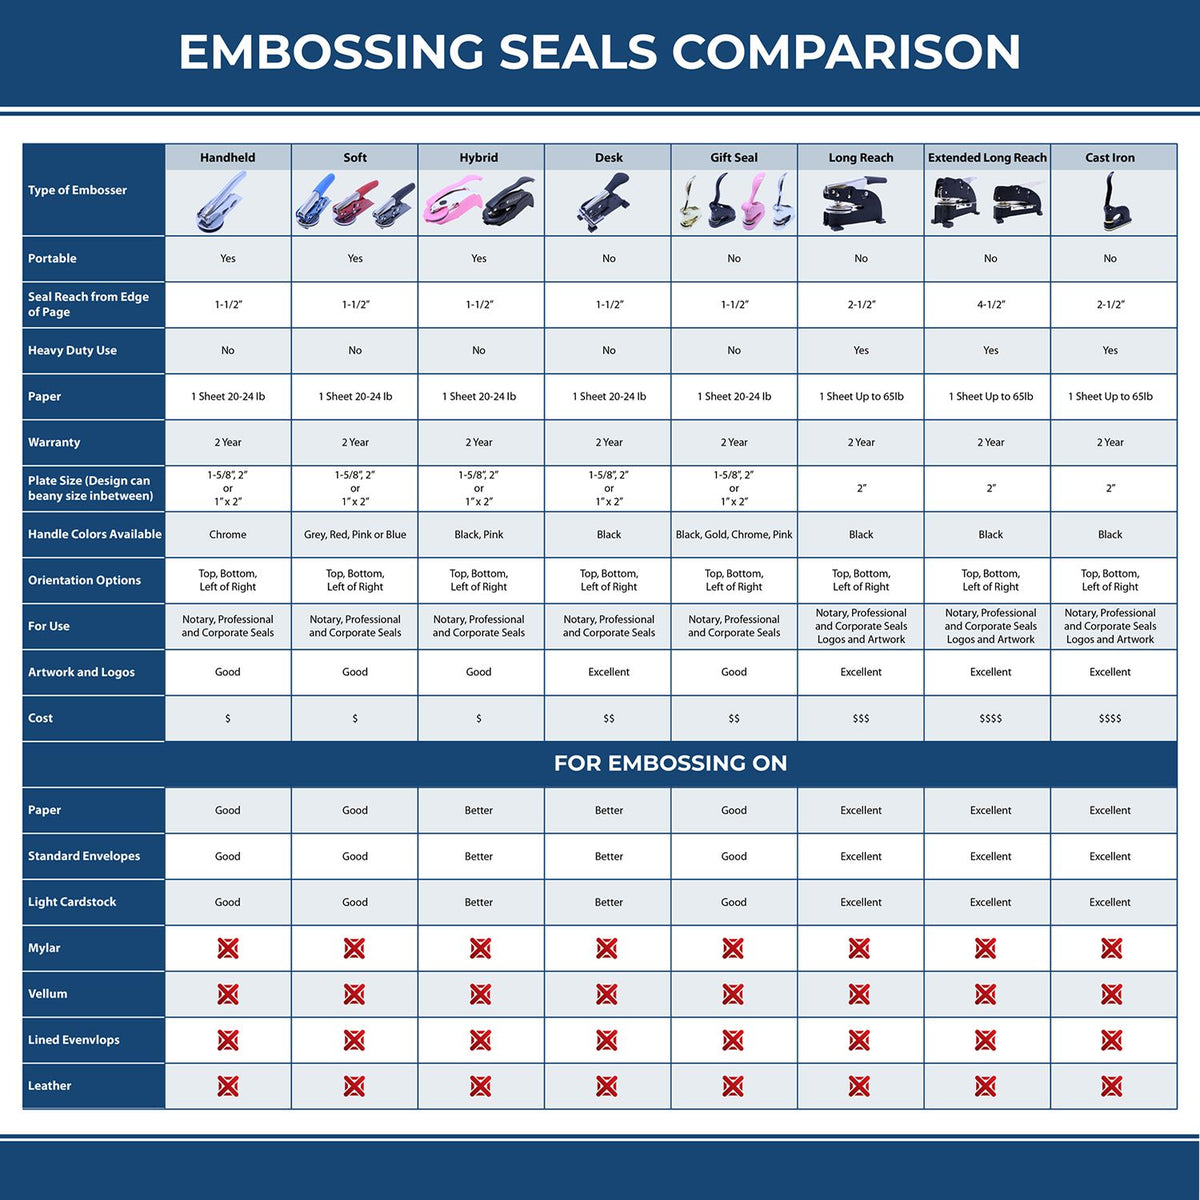 A comparison chart for the different types of mount models available for the Guam Desk Surveyor Seal Embosser.